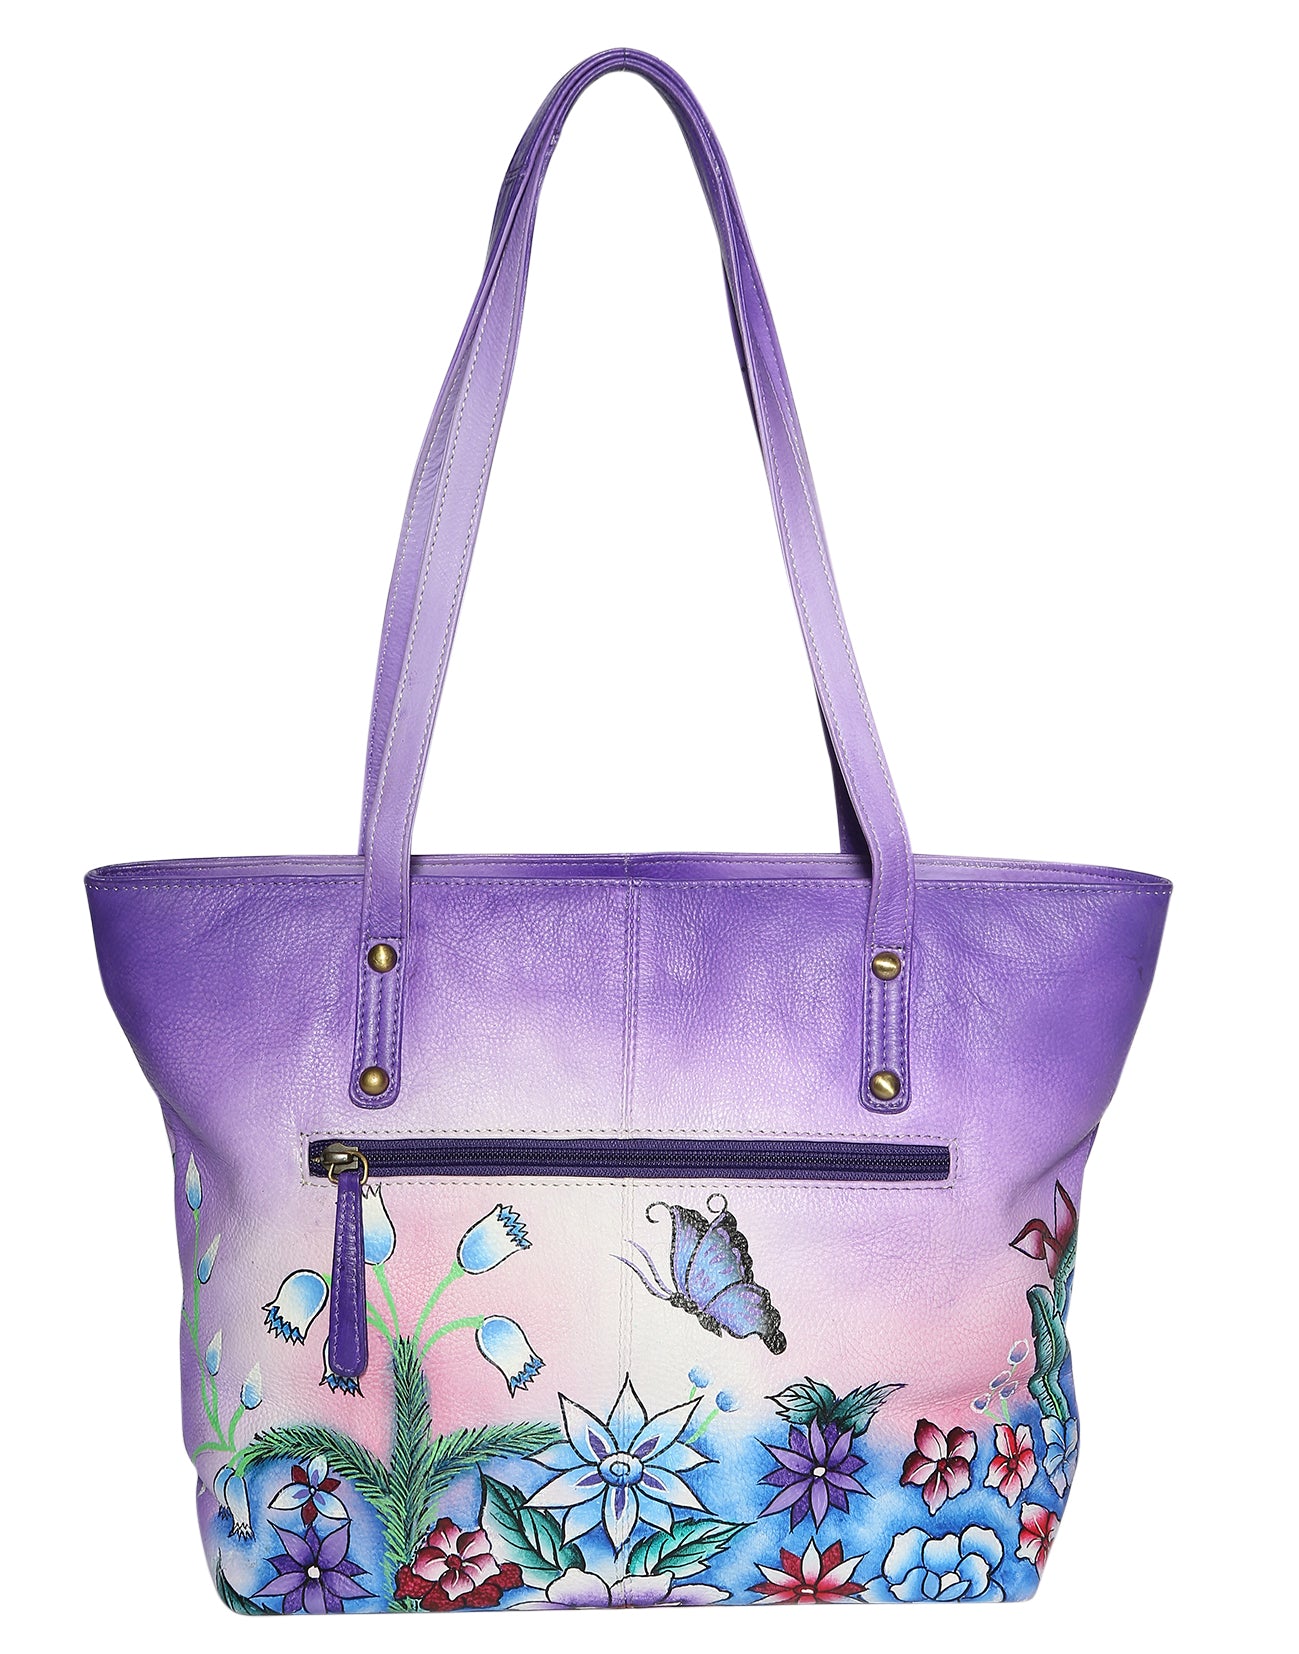 Modapelle Hand Painted Women's Leather Shoulder/Tote Bag